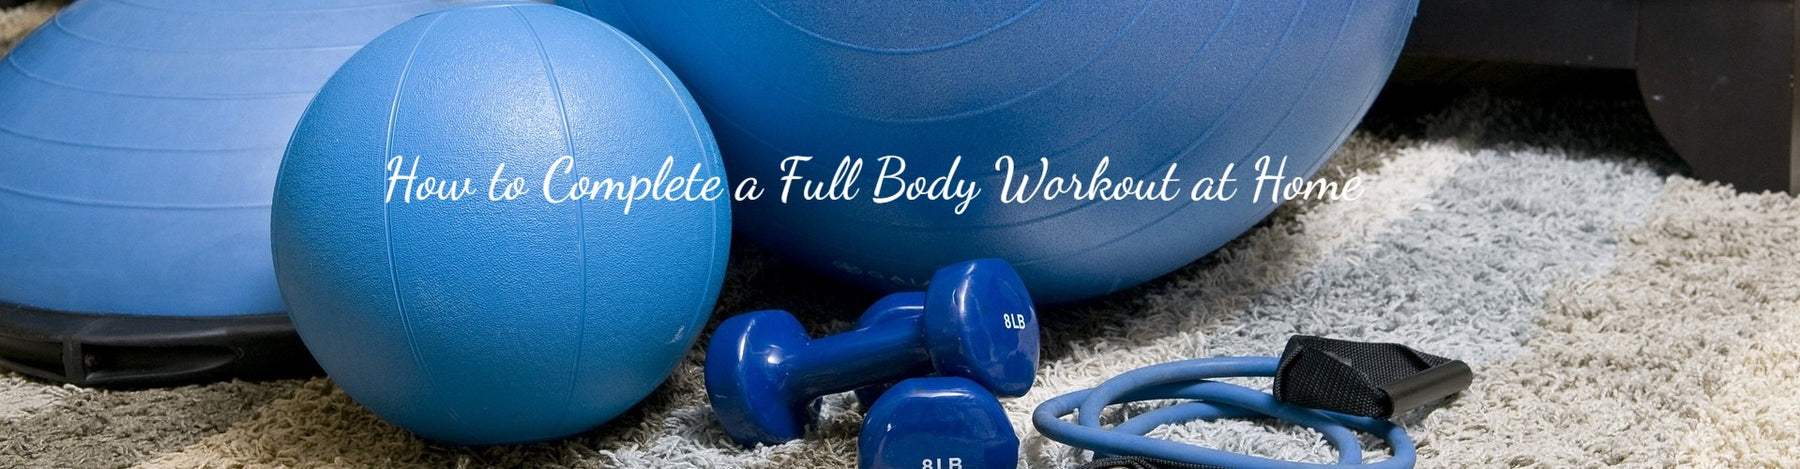 How to Complete a Full Body Workout at Home